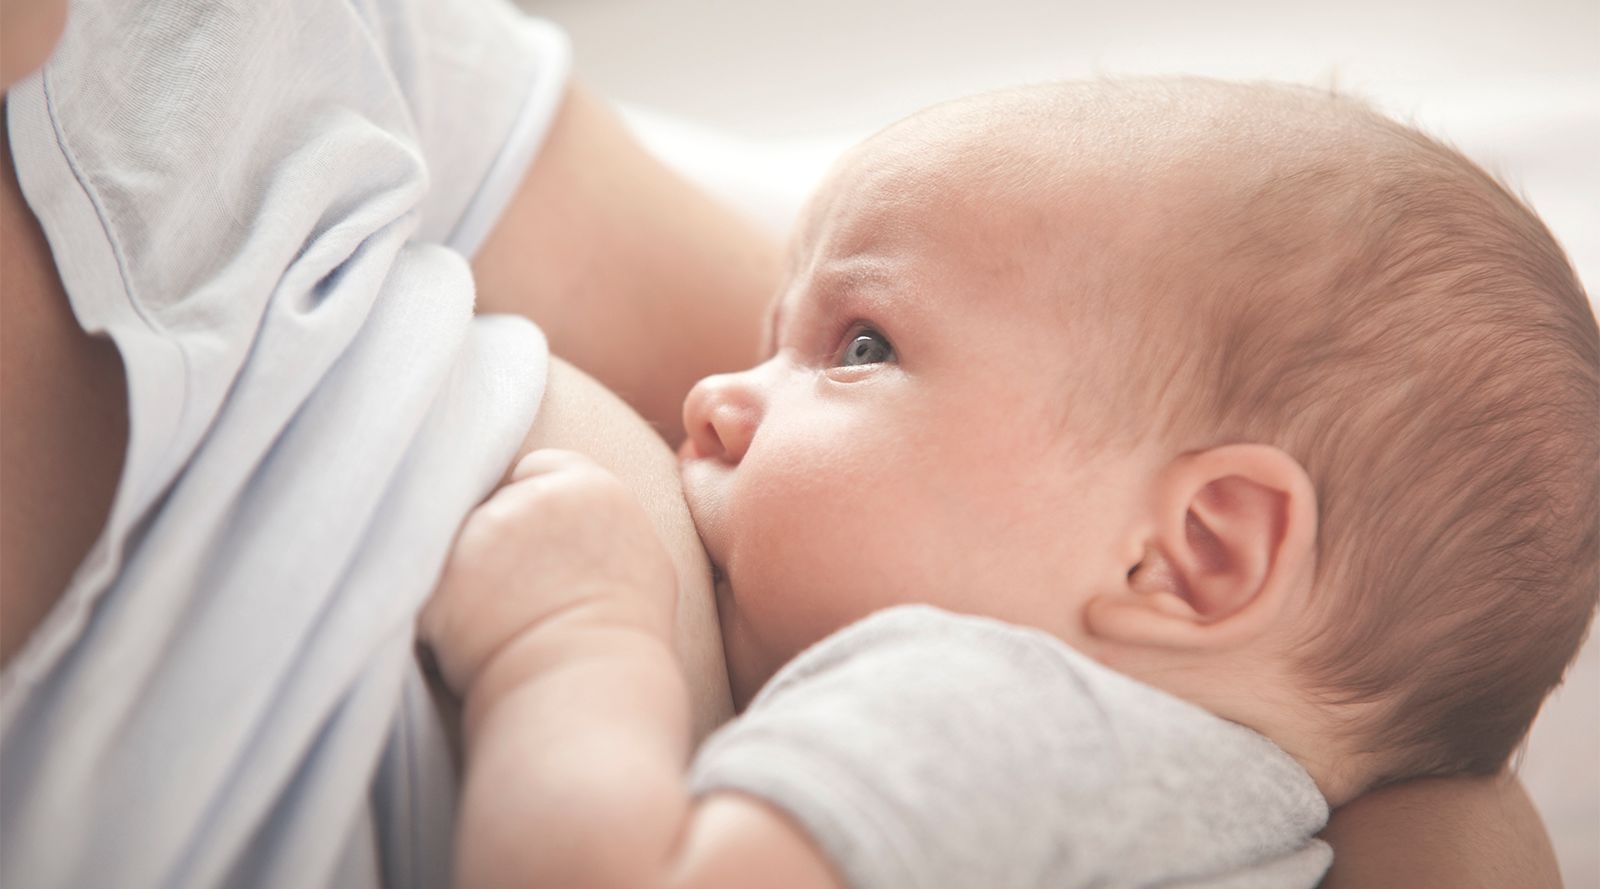 How to Breastfeed your Newborn with Effective Tips and Guide